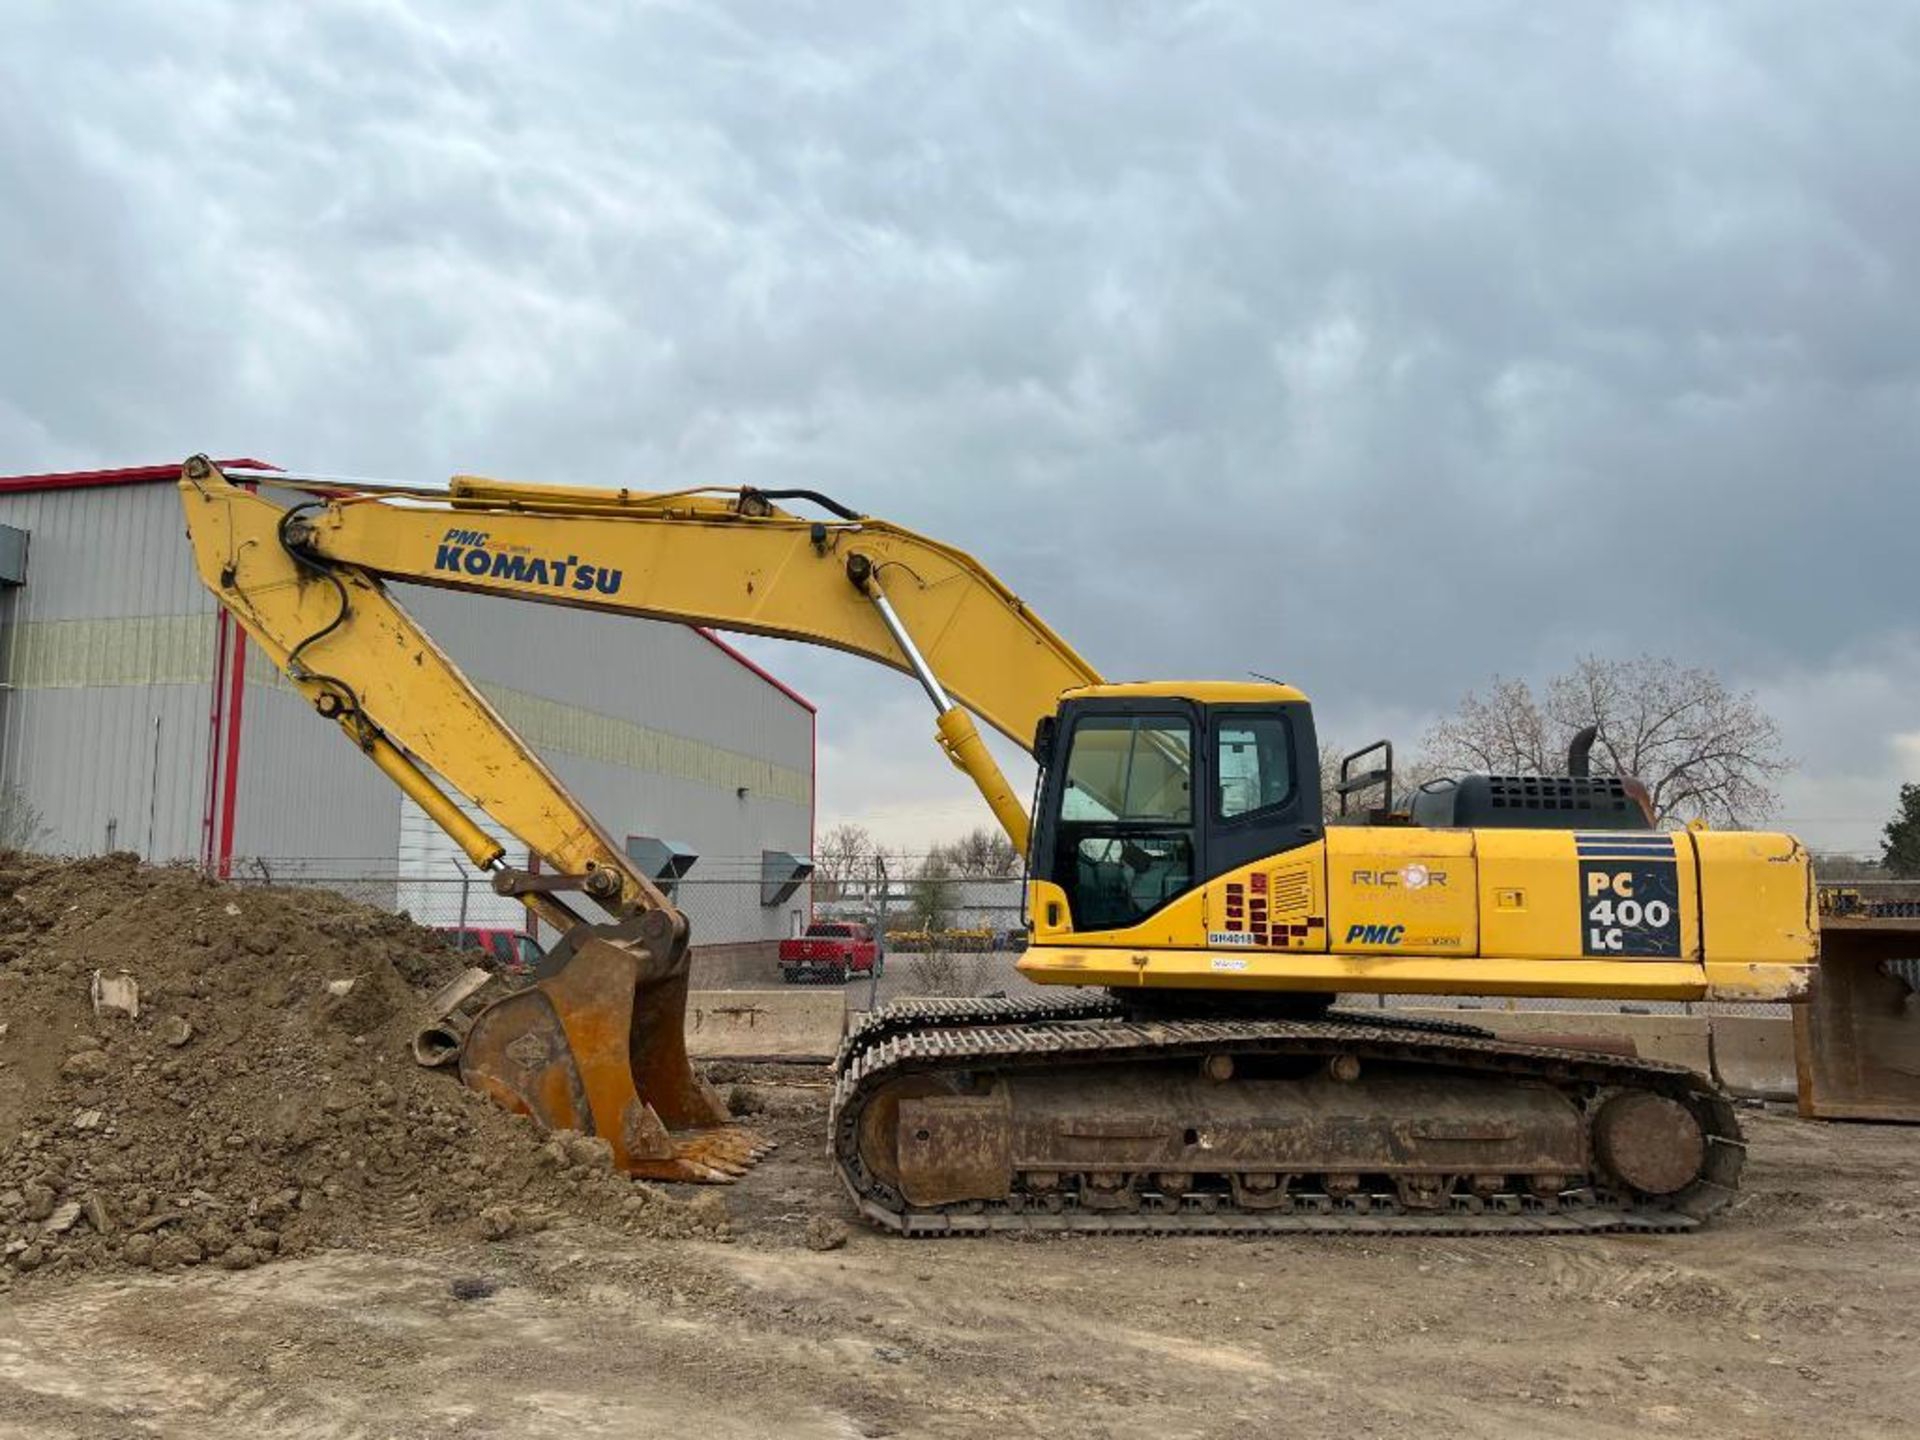 2005 Komatsu PC-400 LC Hydraulic Excavator, Approx. 6,800 Hours, S/N A86322 (Located at 3003 West 52